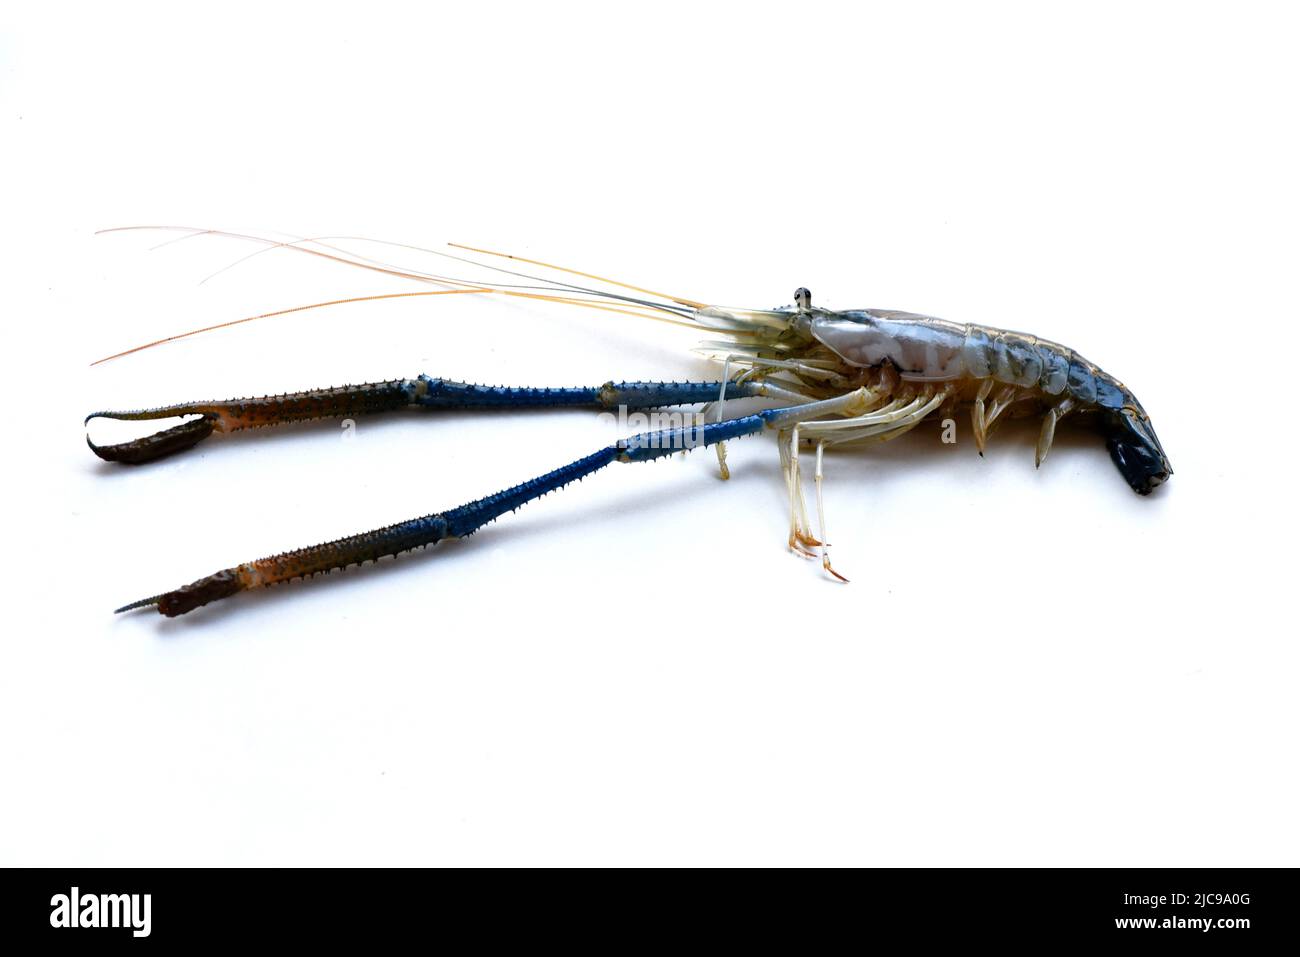 A big fresh river prawn are ready for cooking,to tom Yum Goong,on the White Blackground. Stock Photo